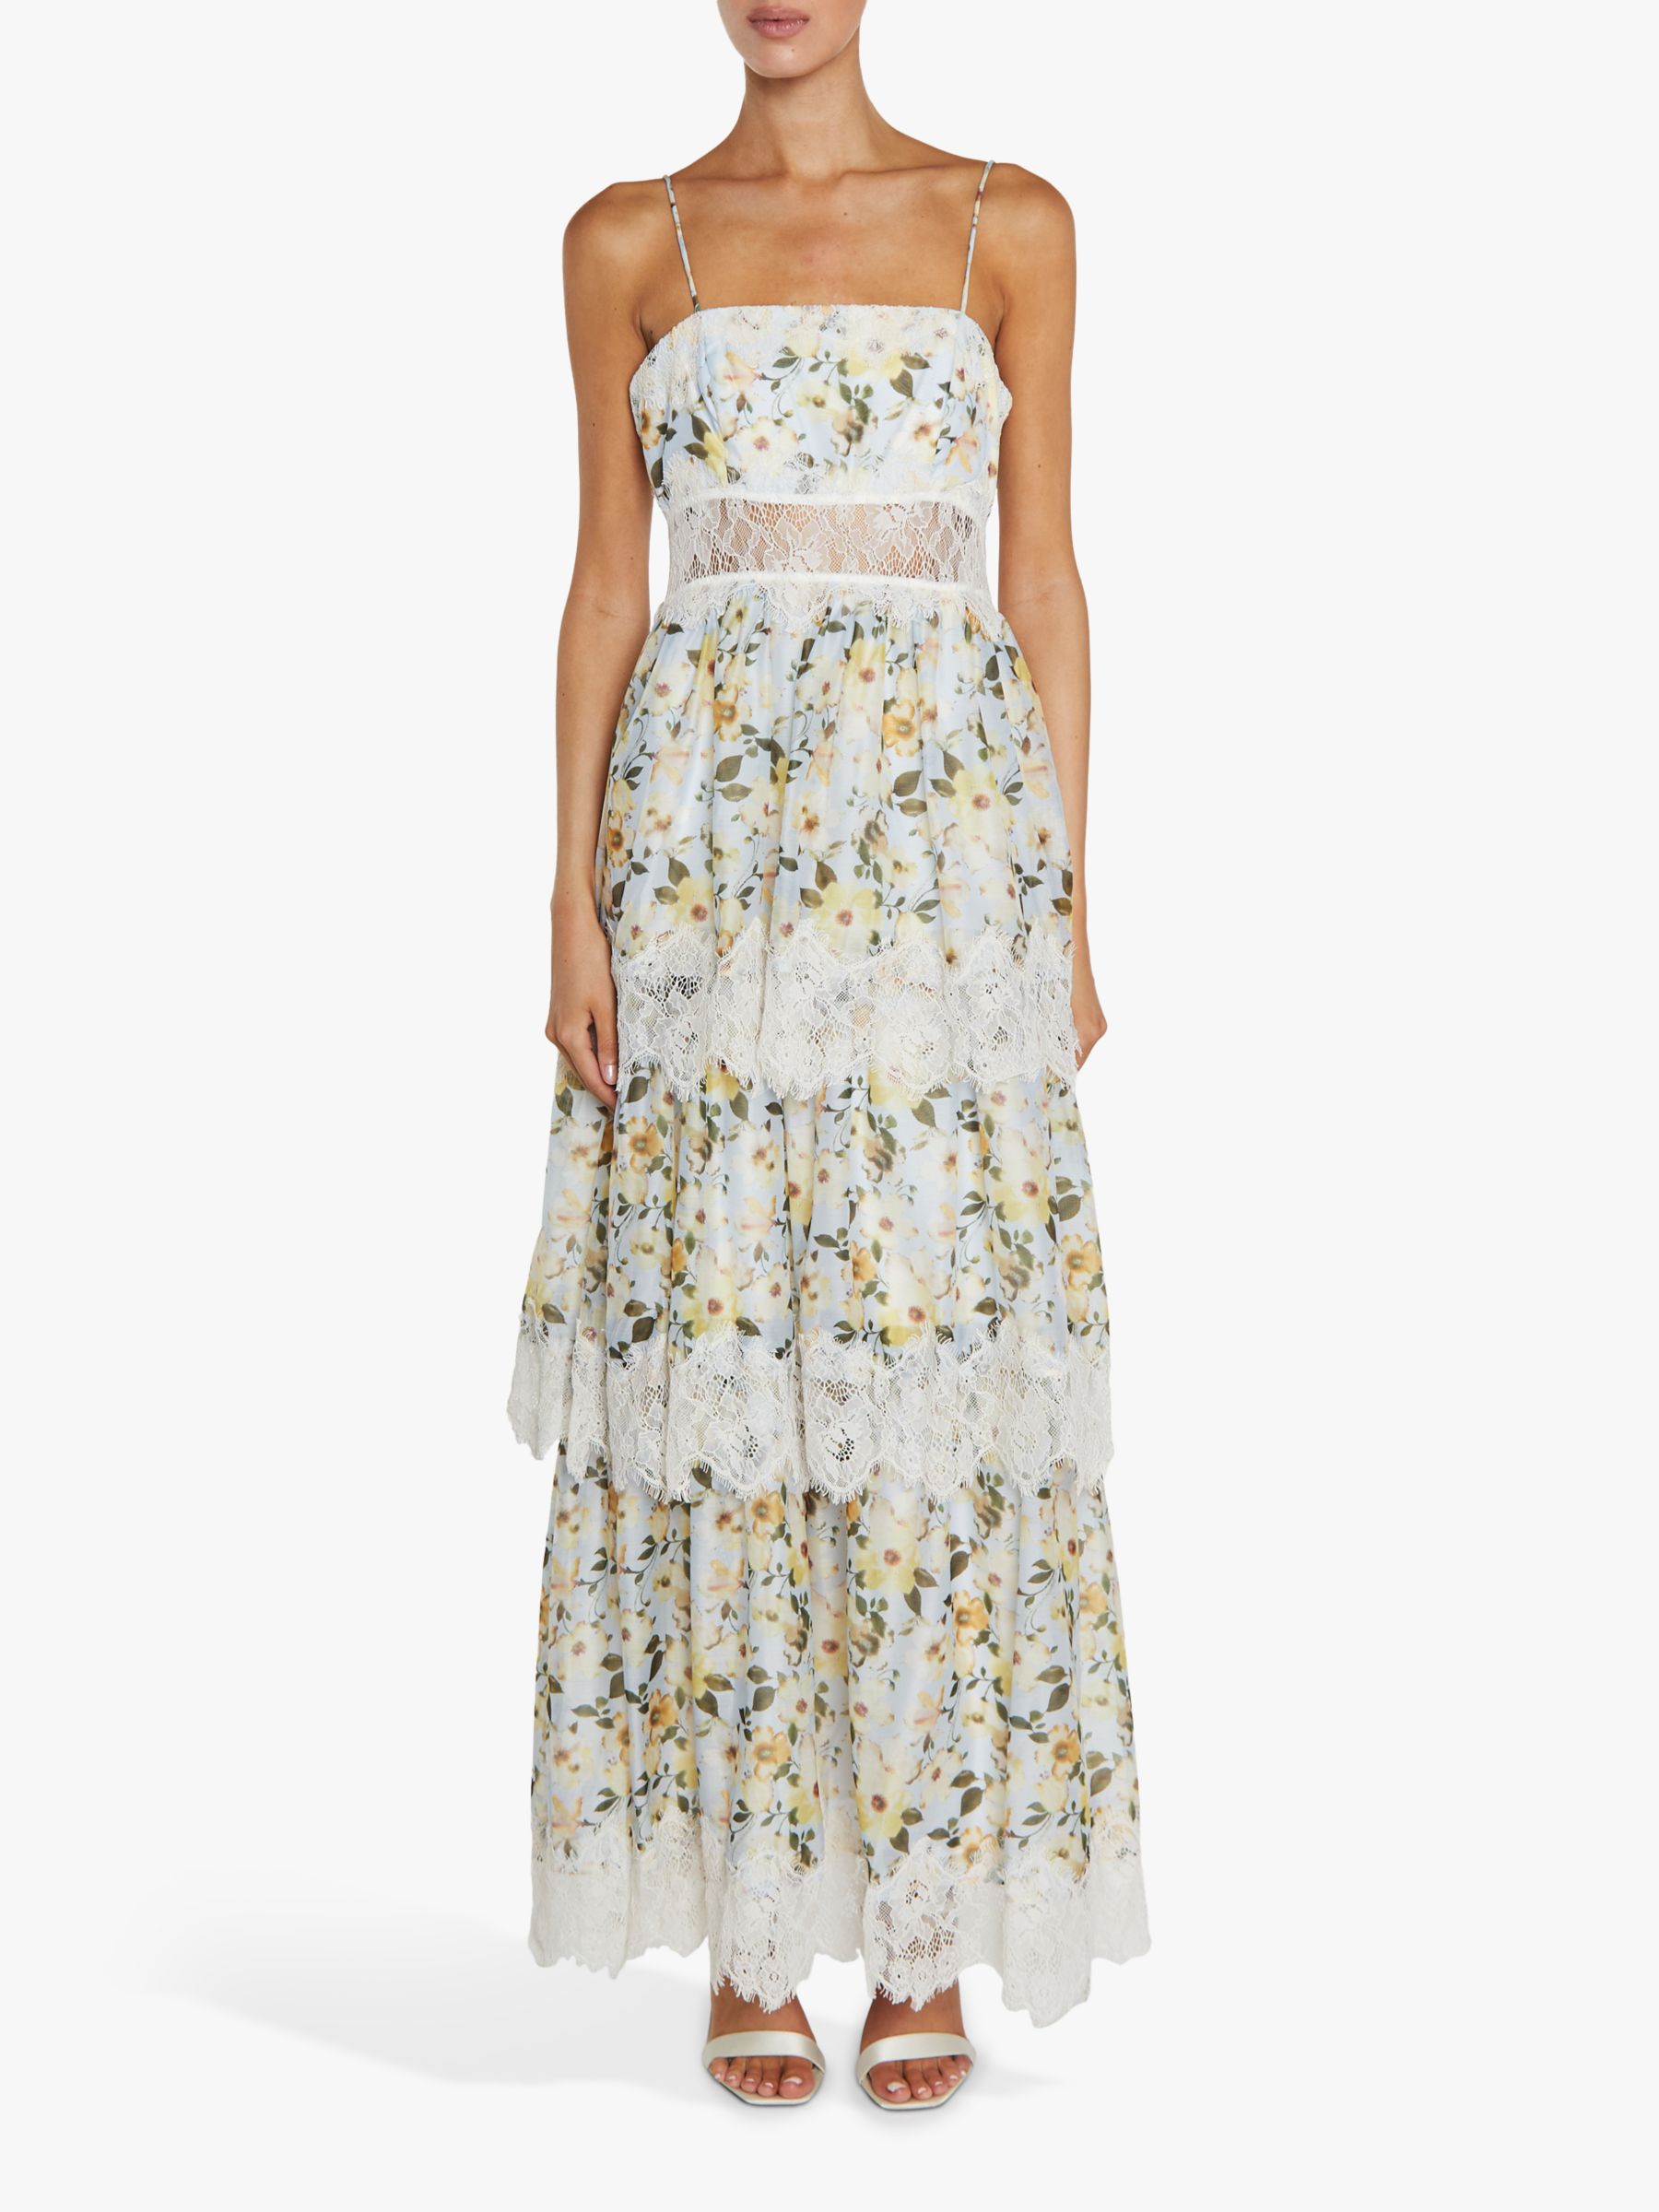 True Decadence Maisie Floral Print Tiered Strappy Maxi Dress, Pale Blue/Multi, 6